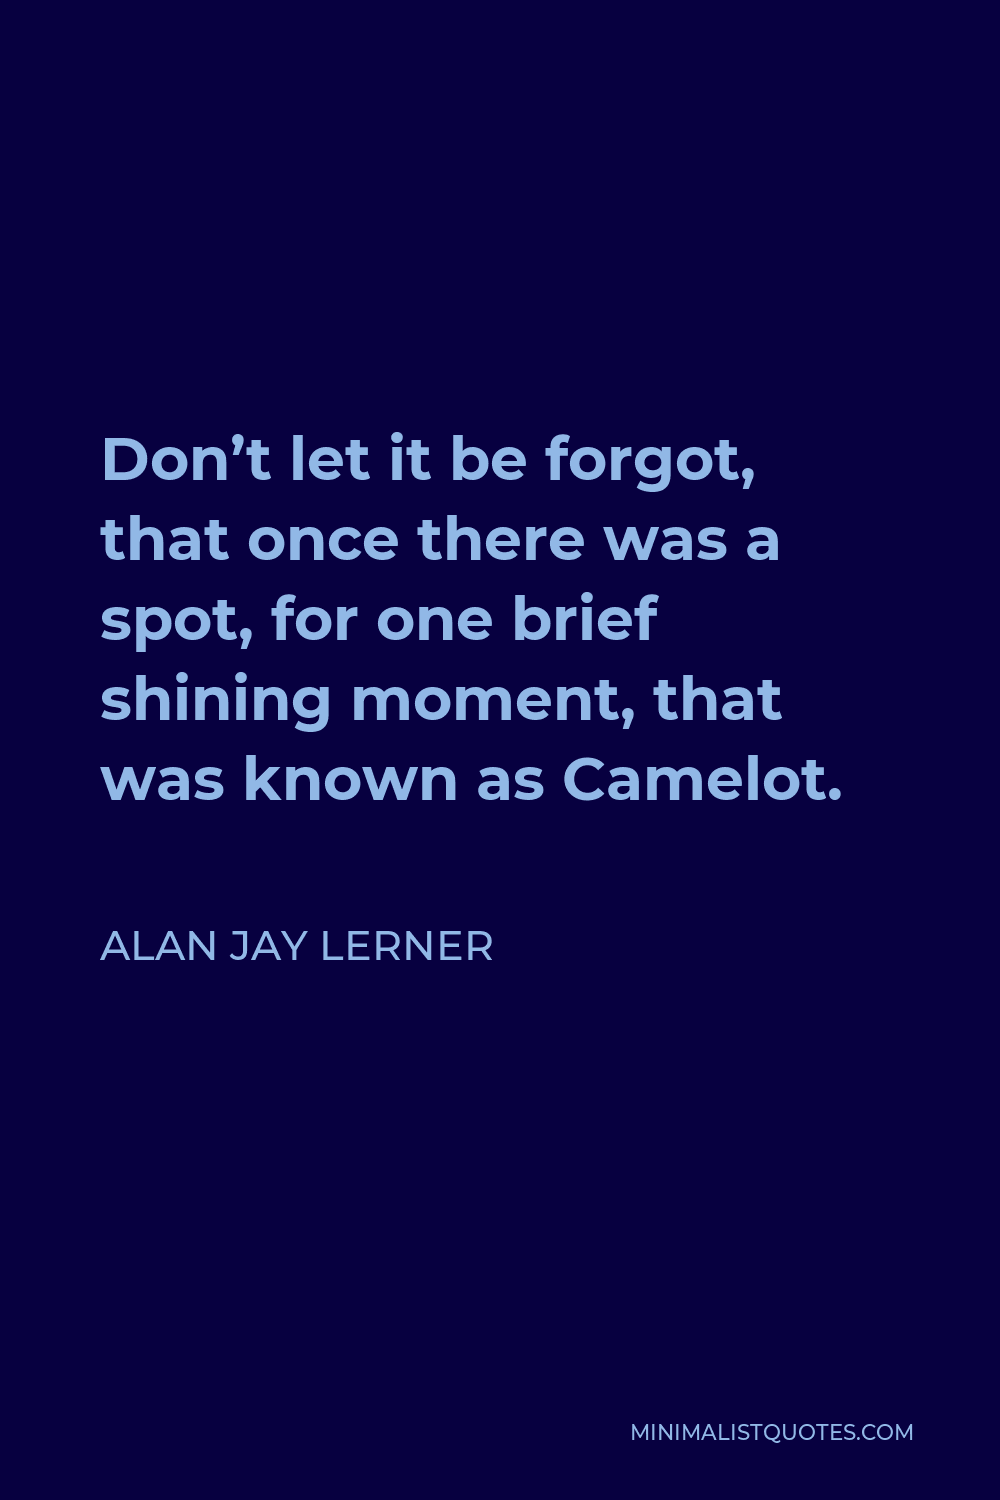 Alan Jay Lerner Quote - Don’t let it be forgot, that once there was a spot, for one brief shining moment, that was known as Camelot.